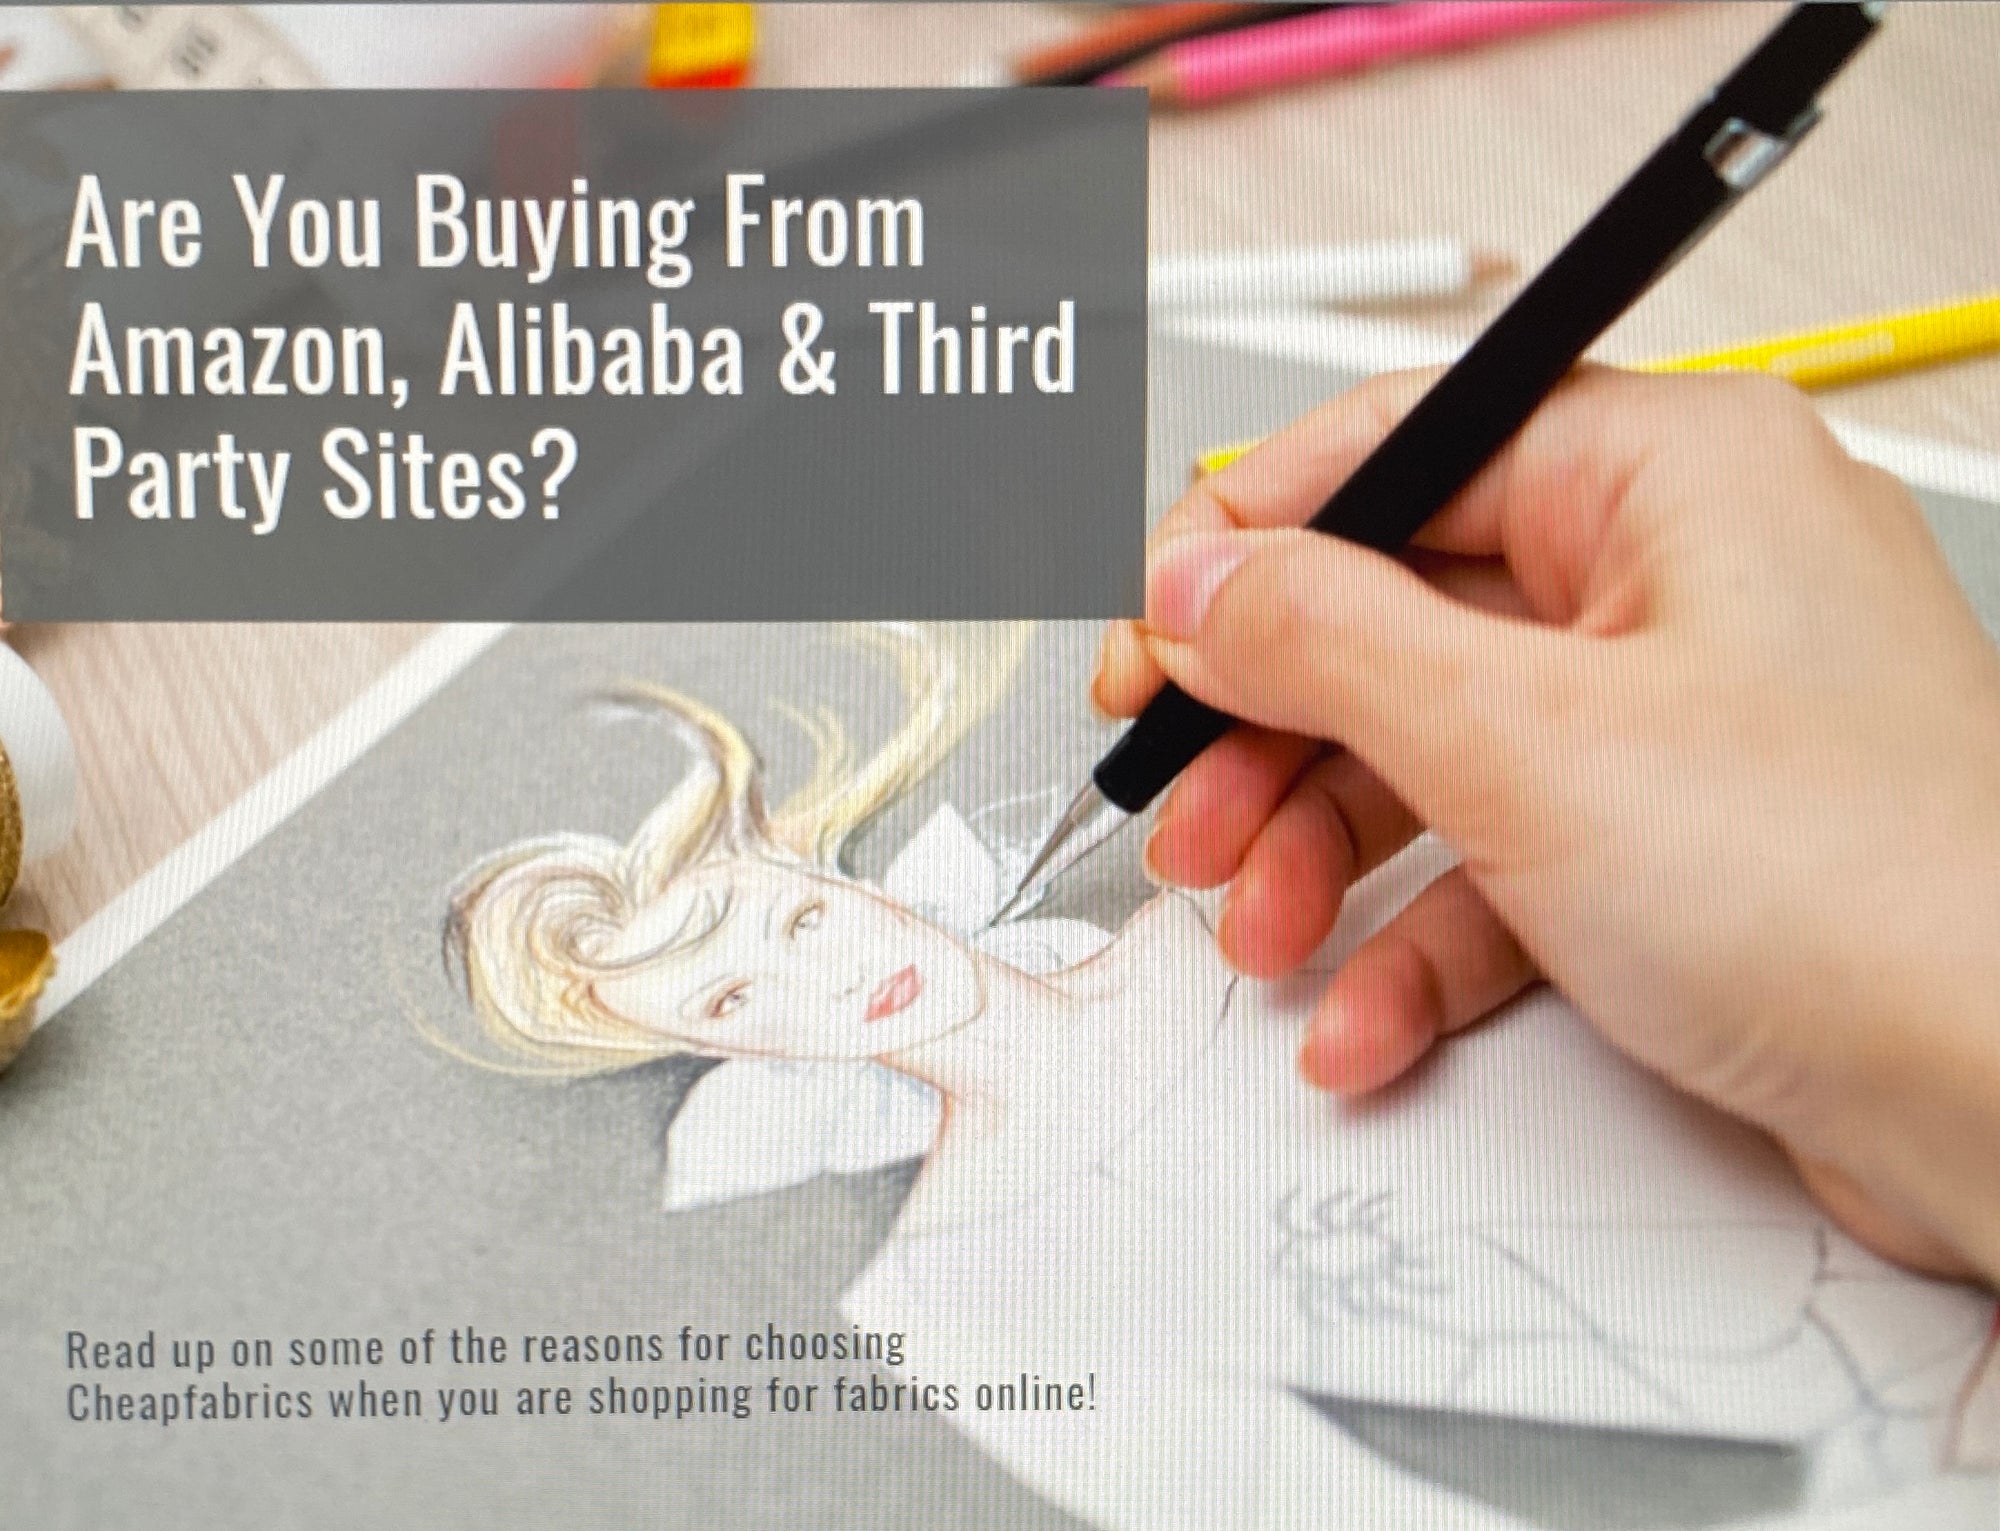 Do You Buy Fabric From Amazon, Alibaba & Third Party Sites?